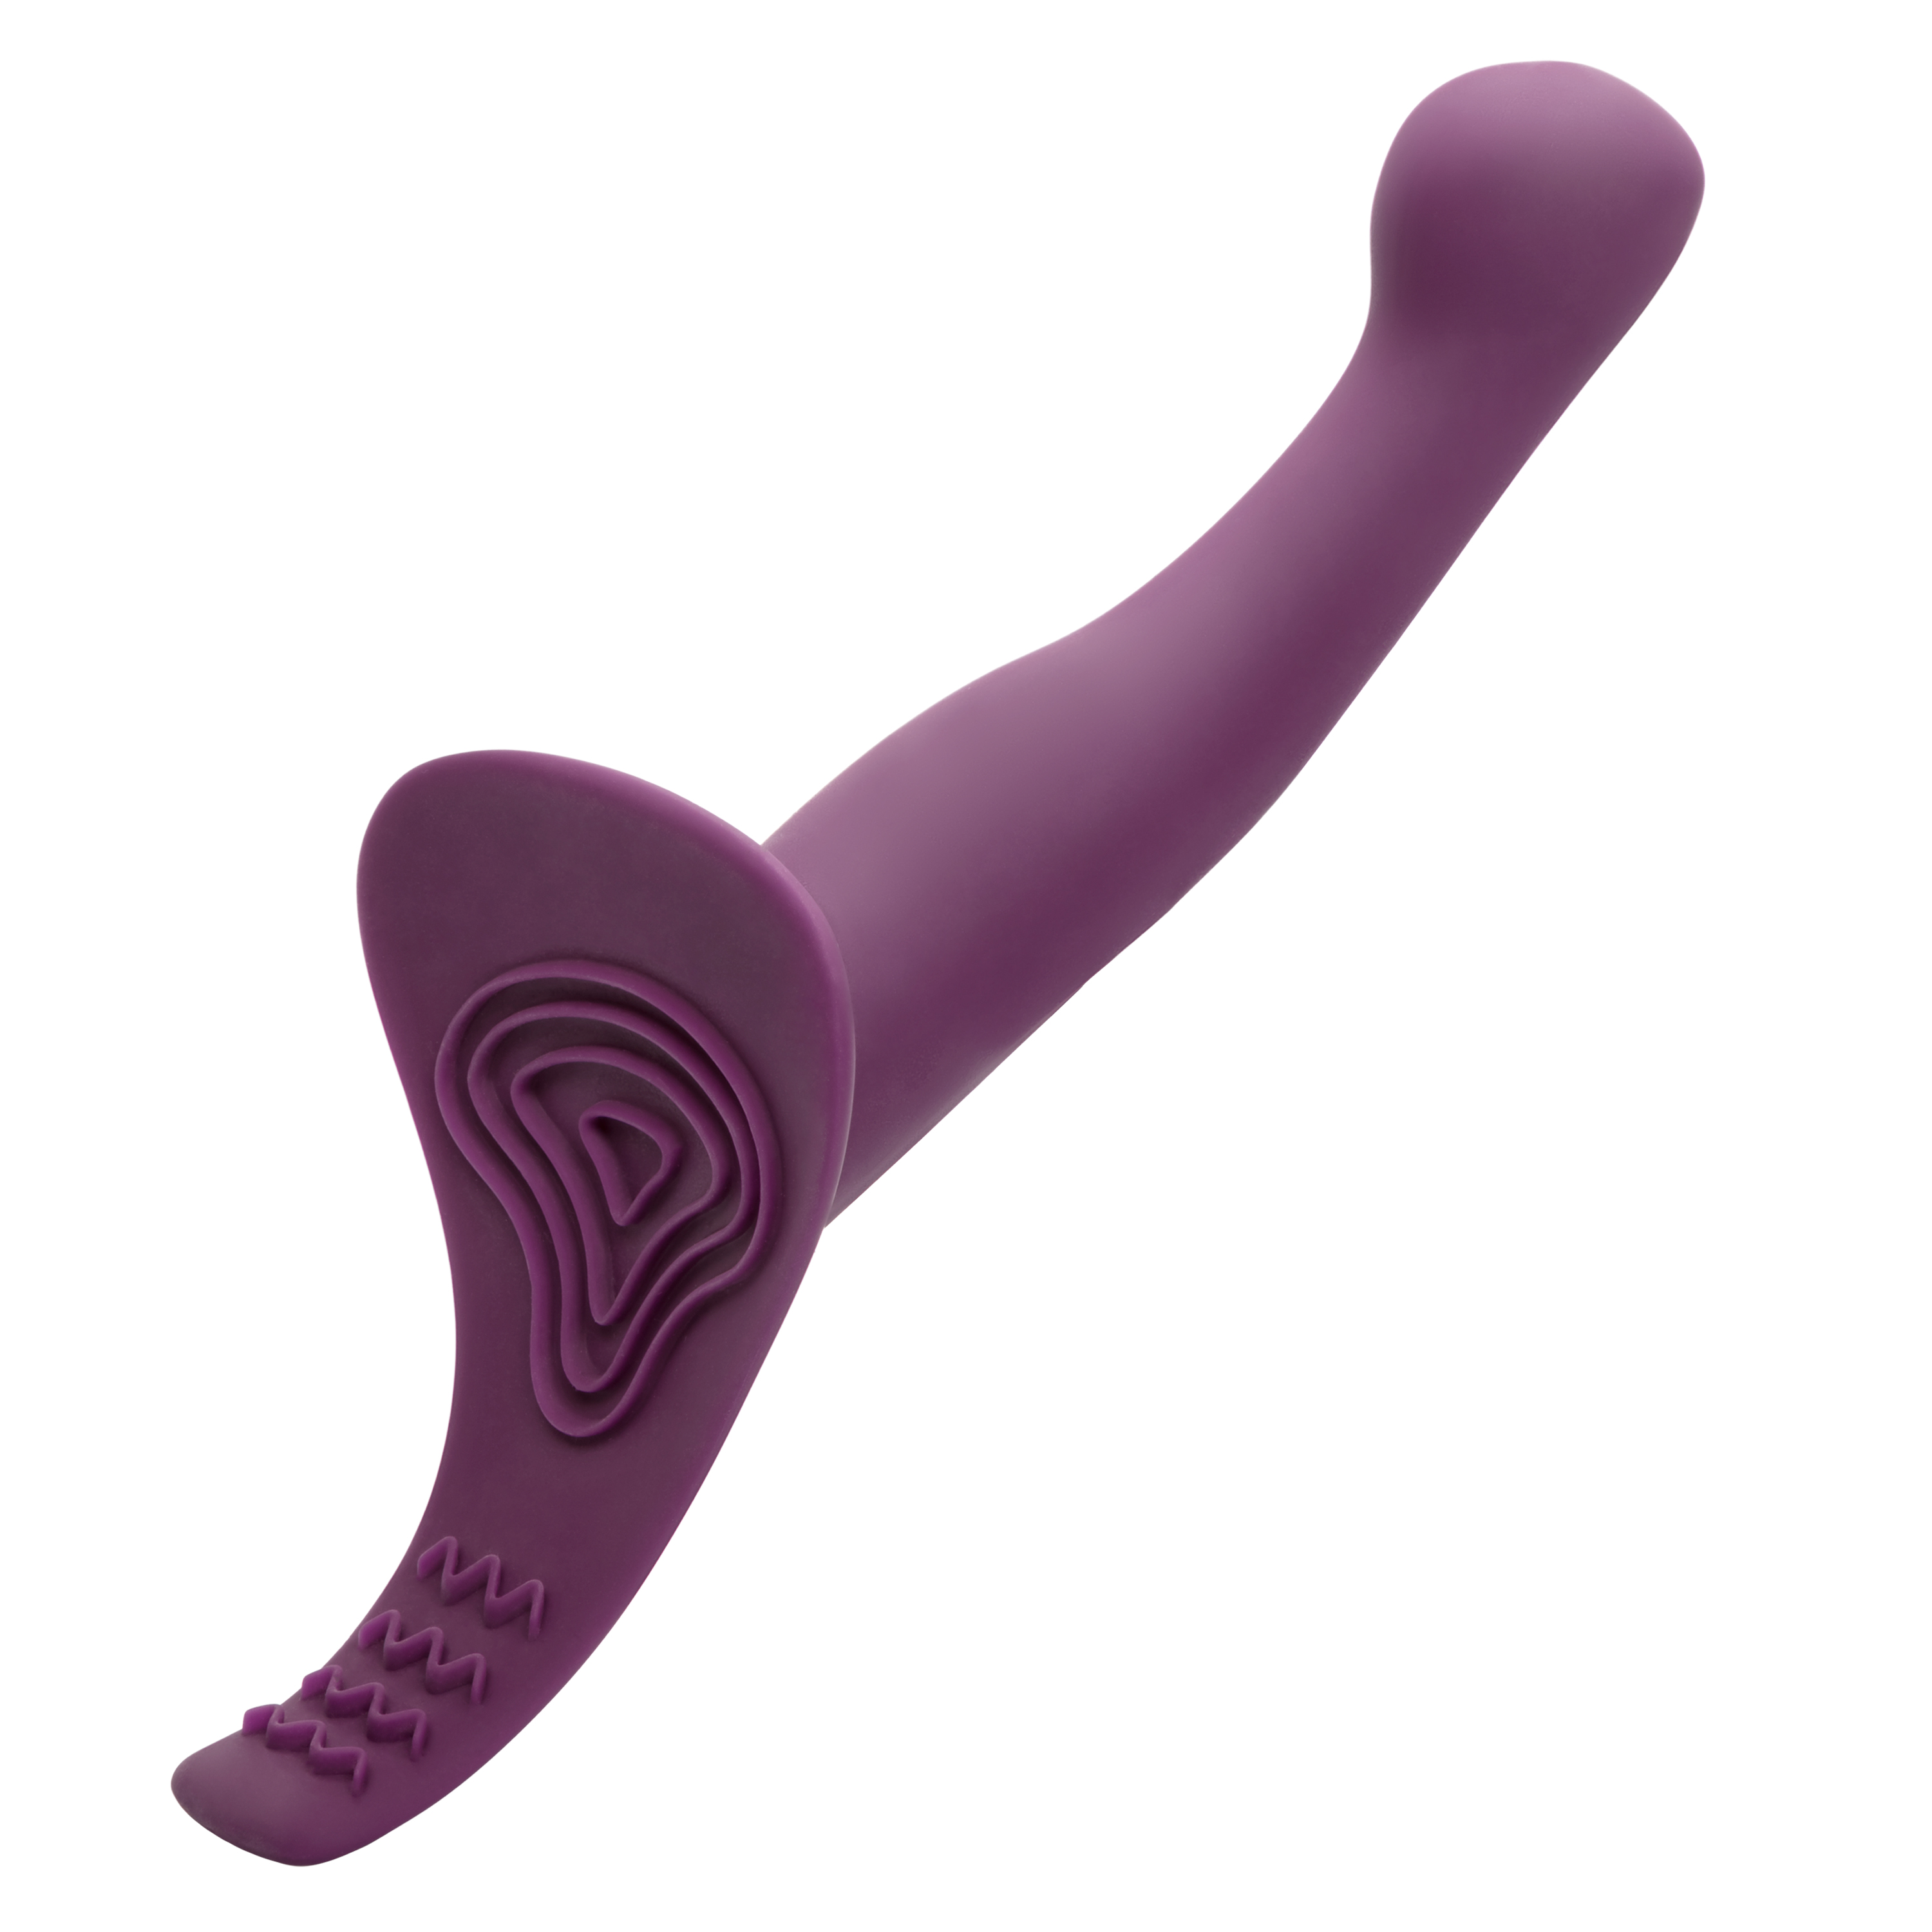 Vibrating+Me2+Probe+Silicone+G-Vibe+Waterproof+6.5+Inch